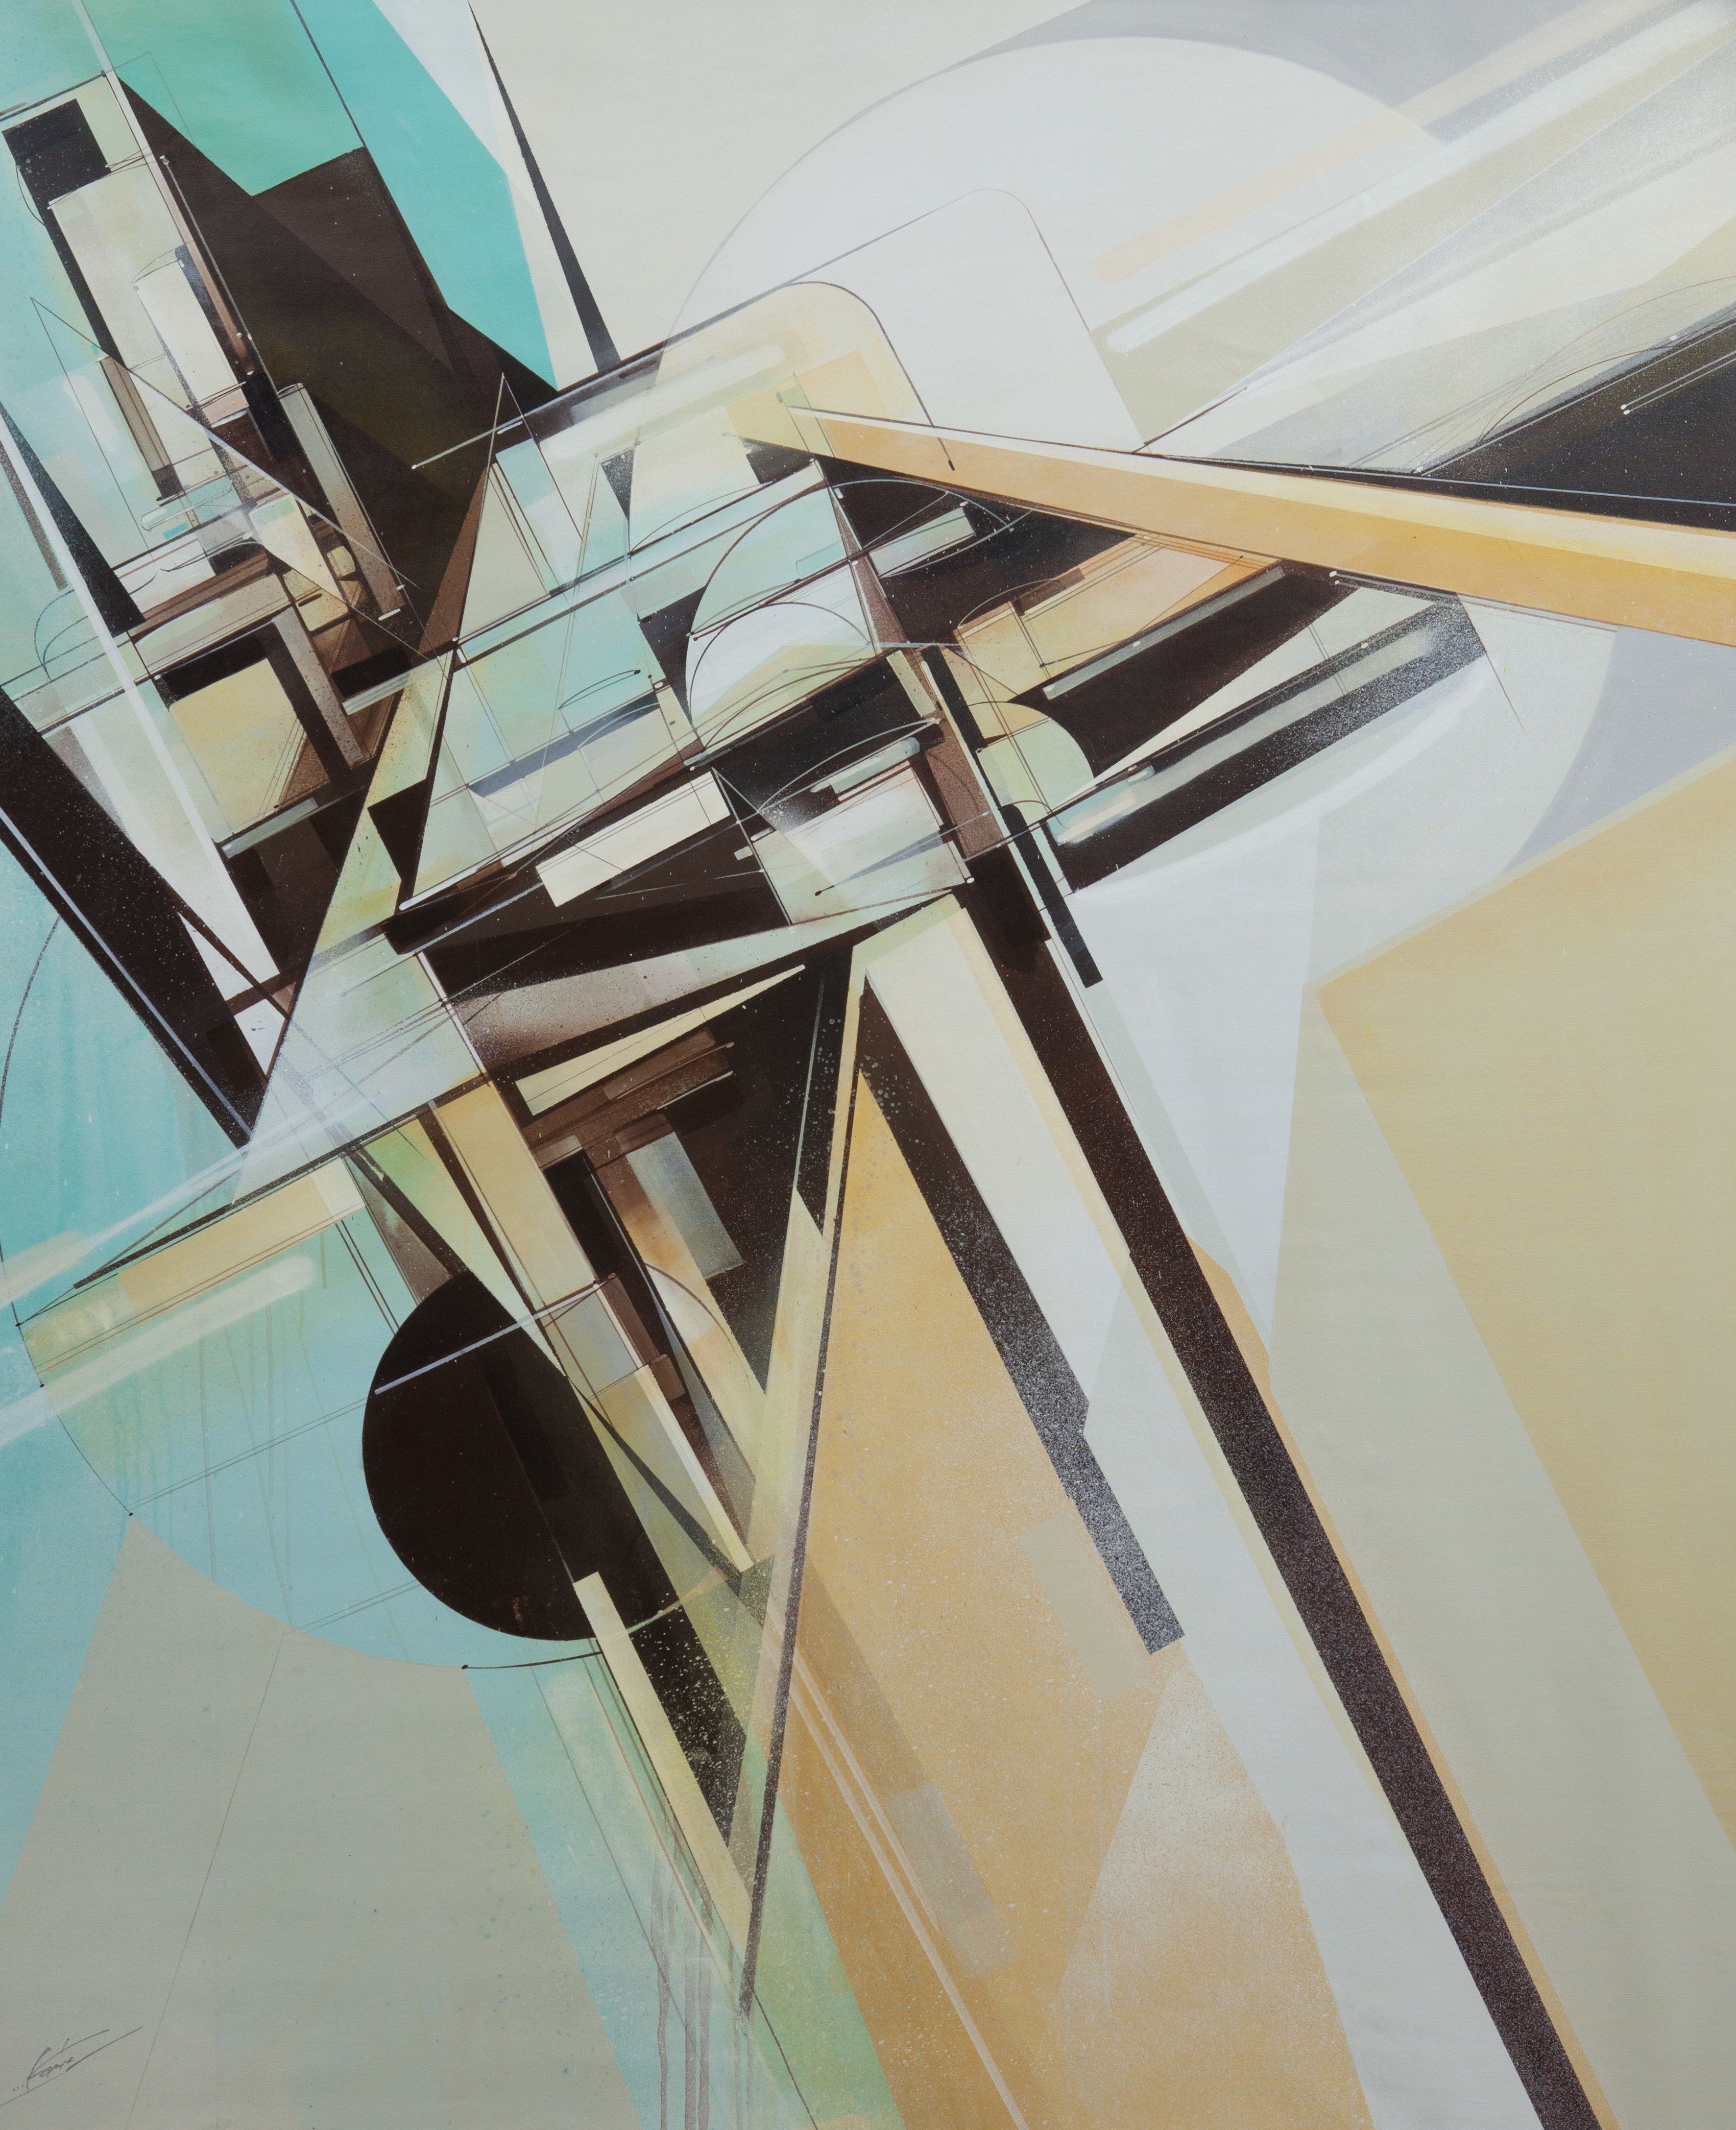 Preview Kofie “Structurally Sound” at White Walls Gallery | Graffuturism